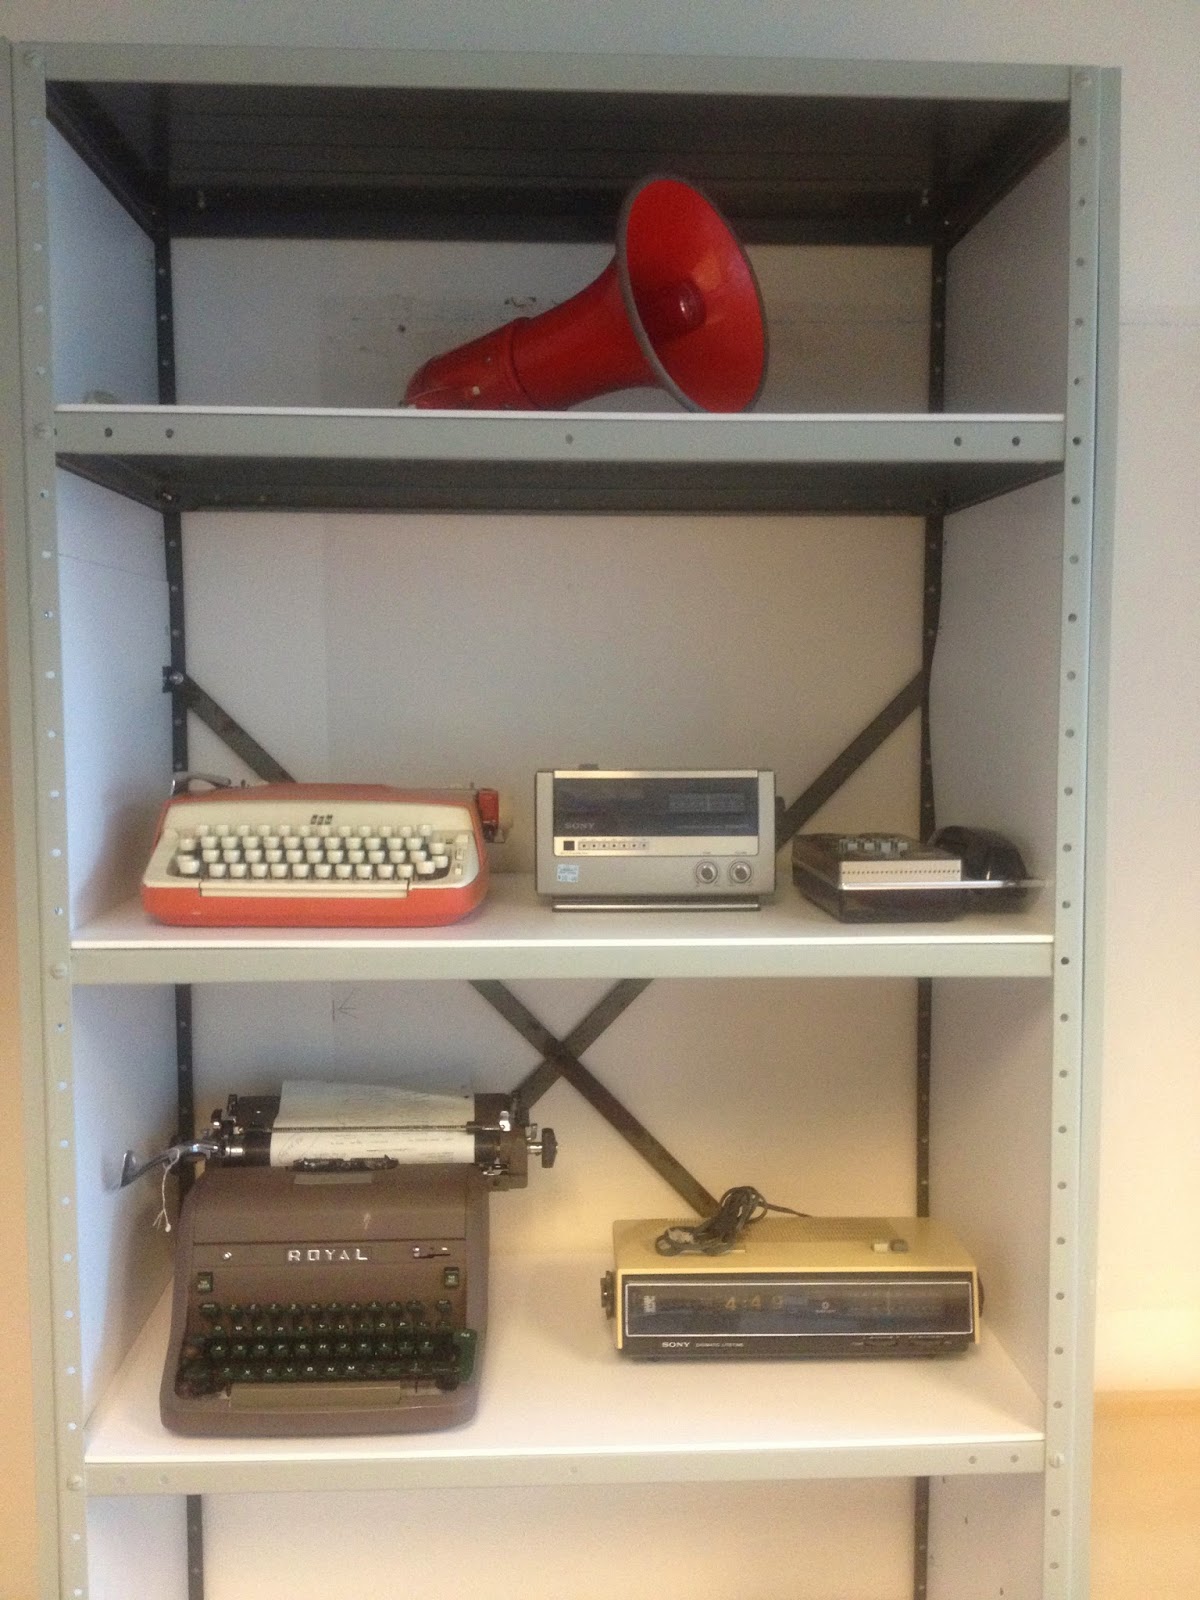 Collected artifacts on shelves from the late seventies. A red bullhorn, two typewriters, a radio, clock, and dial pad phone sit on the shelves.